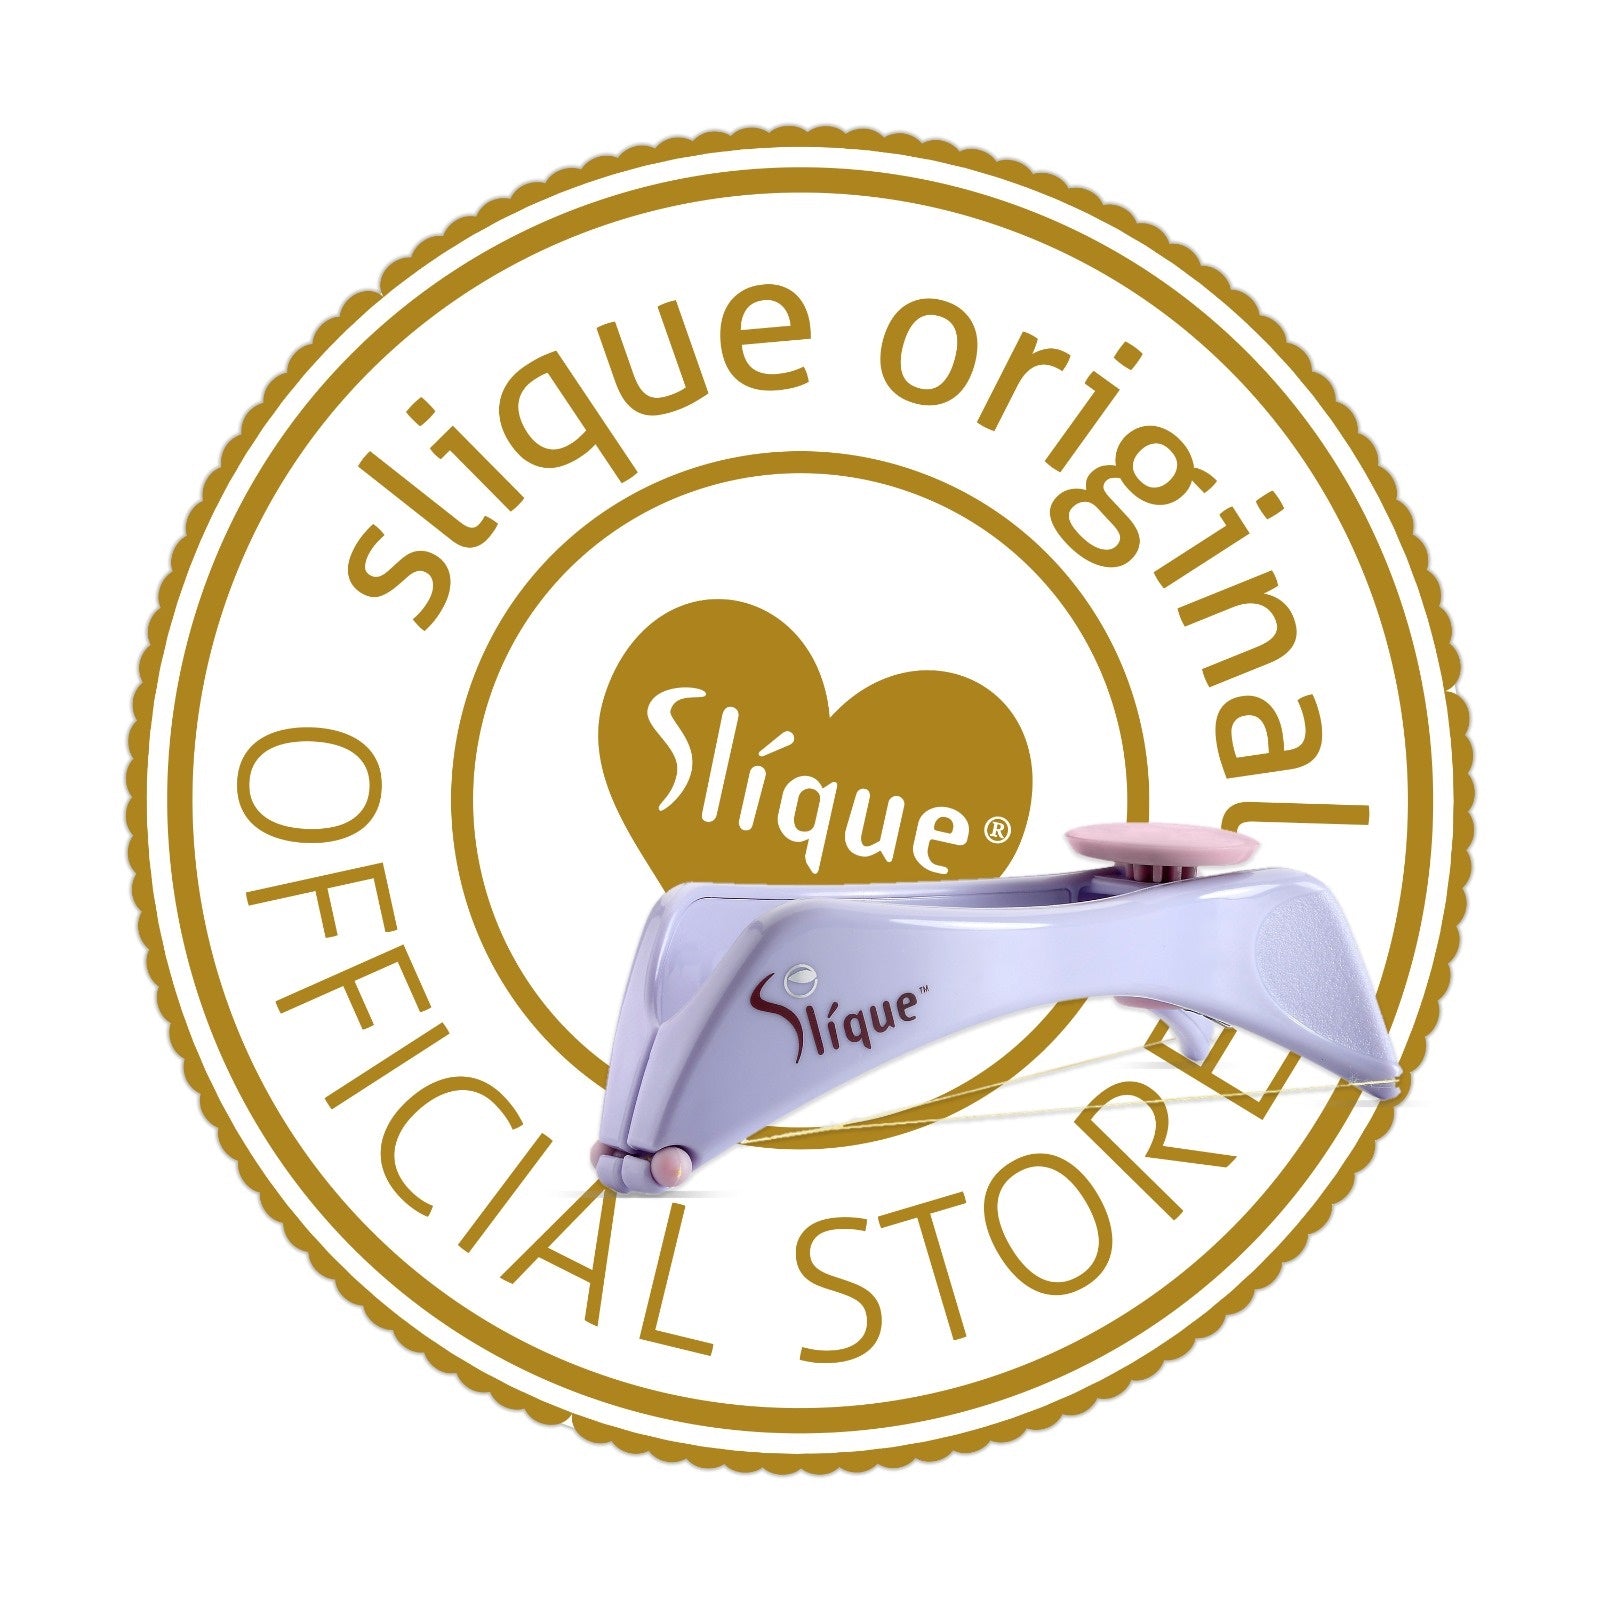 Superb slique hair threading For Hair Styling 